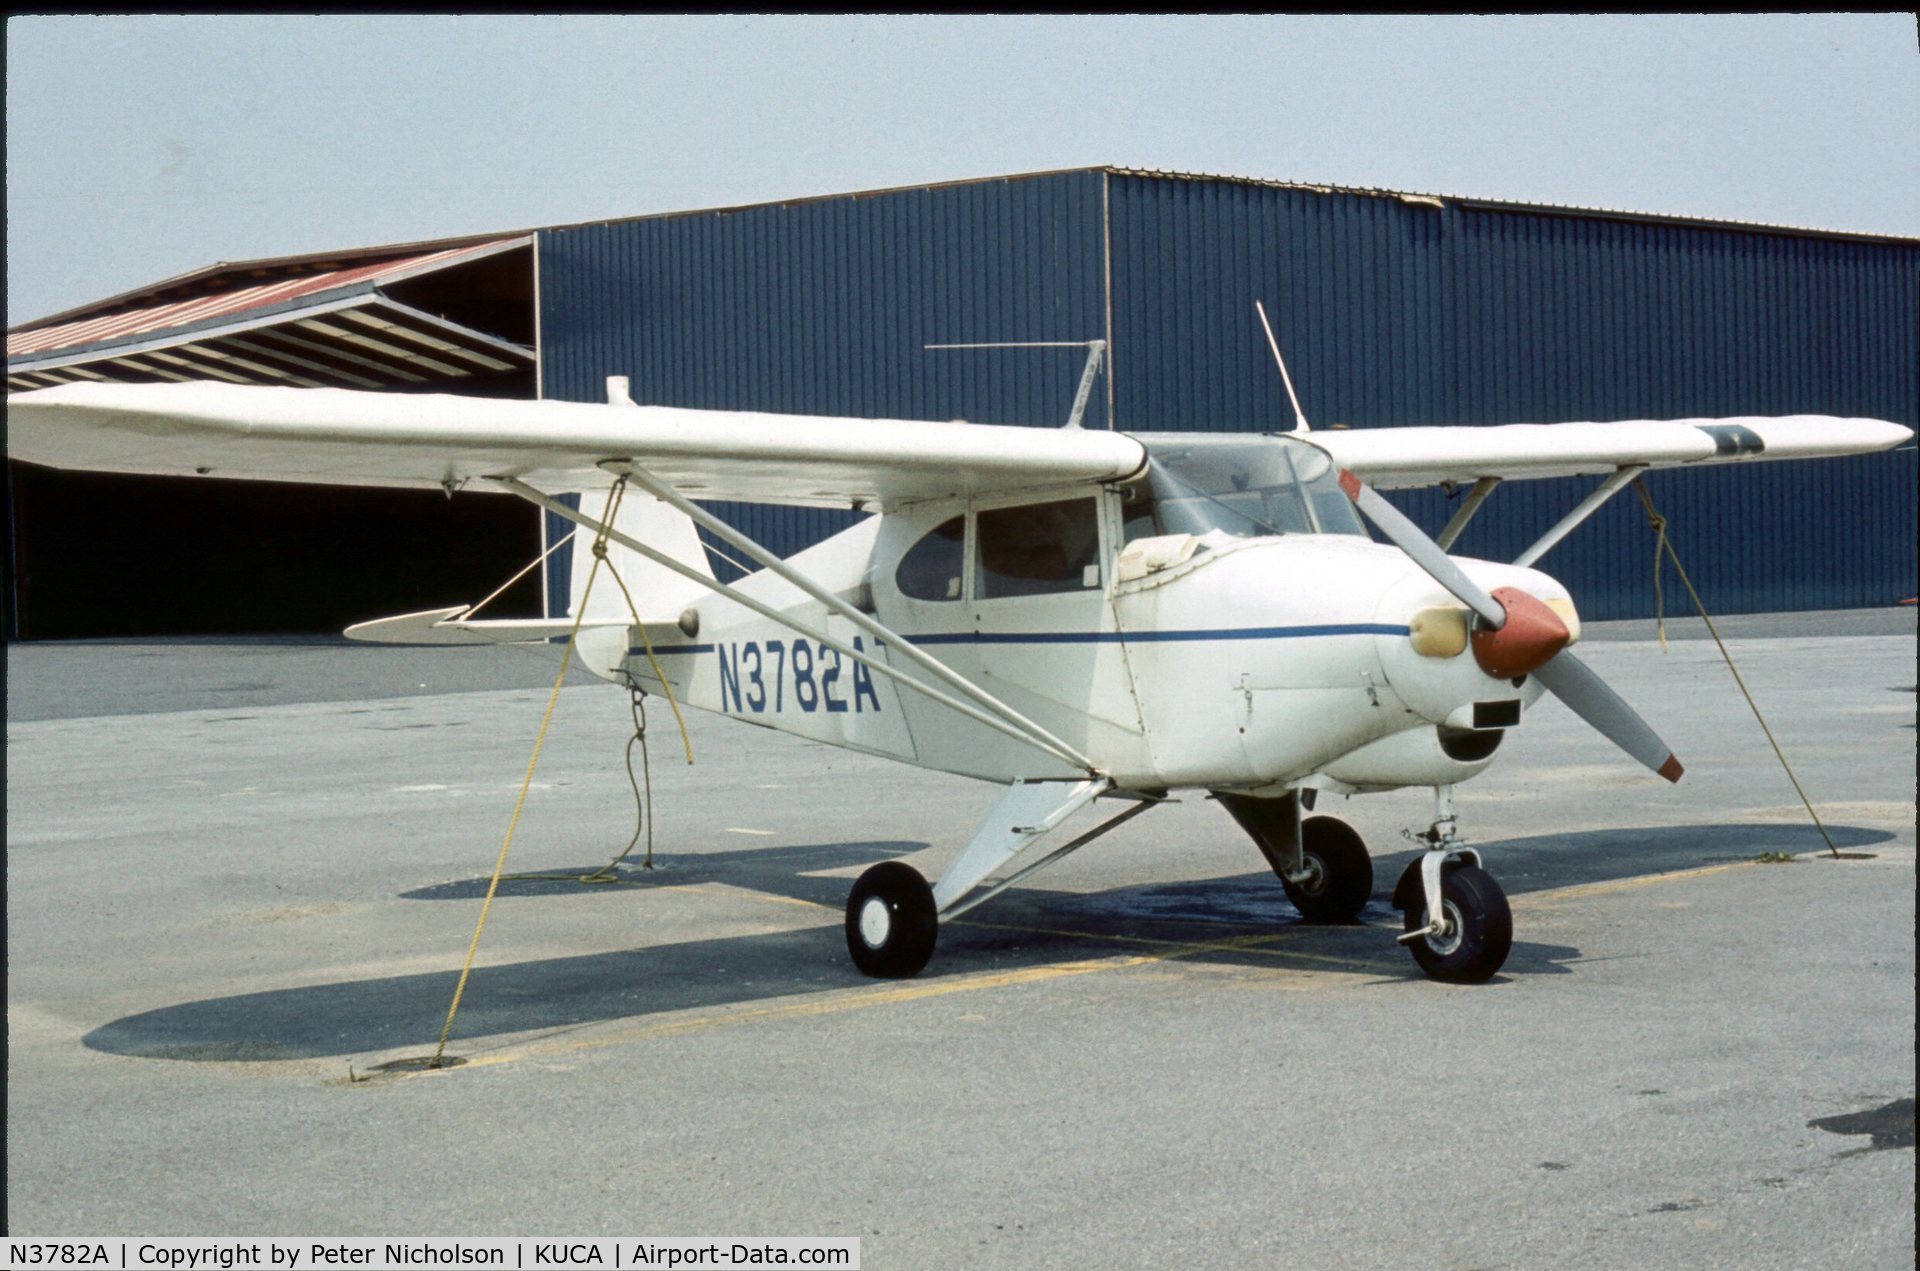 N3782A, 1953 Piper PA-22-135 Tri-Pacer C/N 22-2024, This Colt was seen at Oneida County Airport, New York State in 1976. Airport closed in 2007.